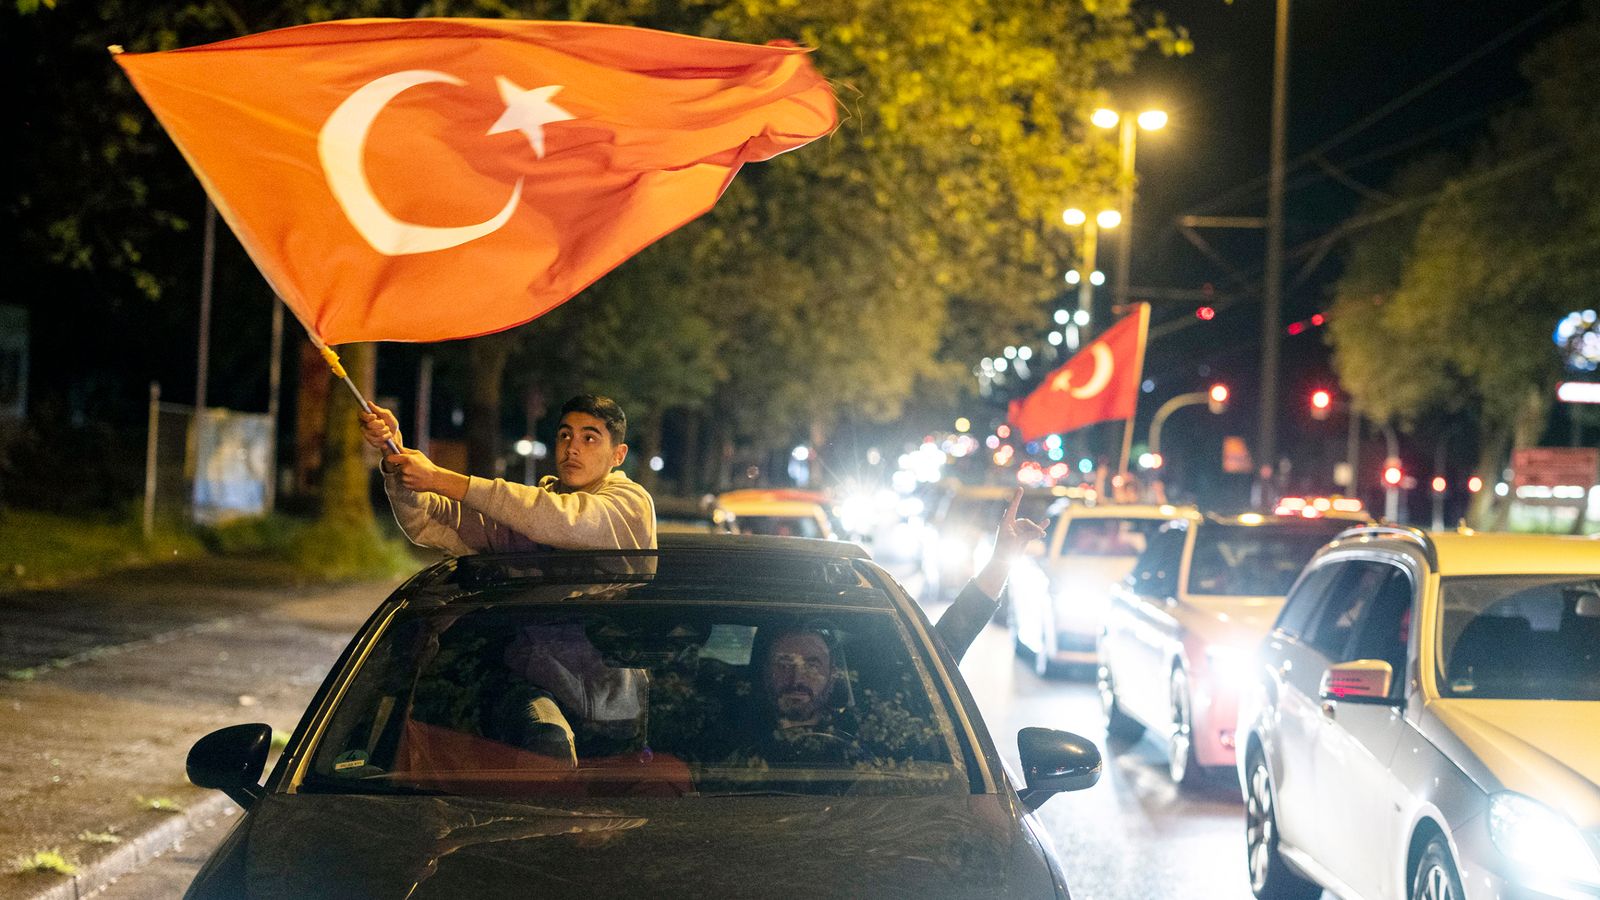 Turkey election: 'Highly likely' election will go to run-off with Erdogan narrowly in the lead